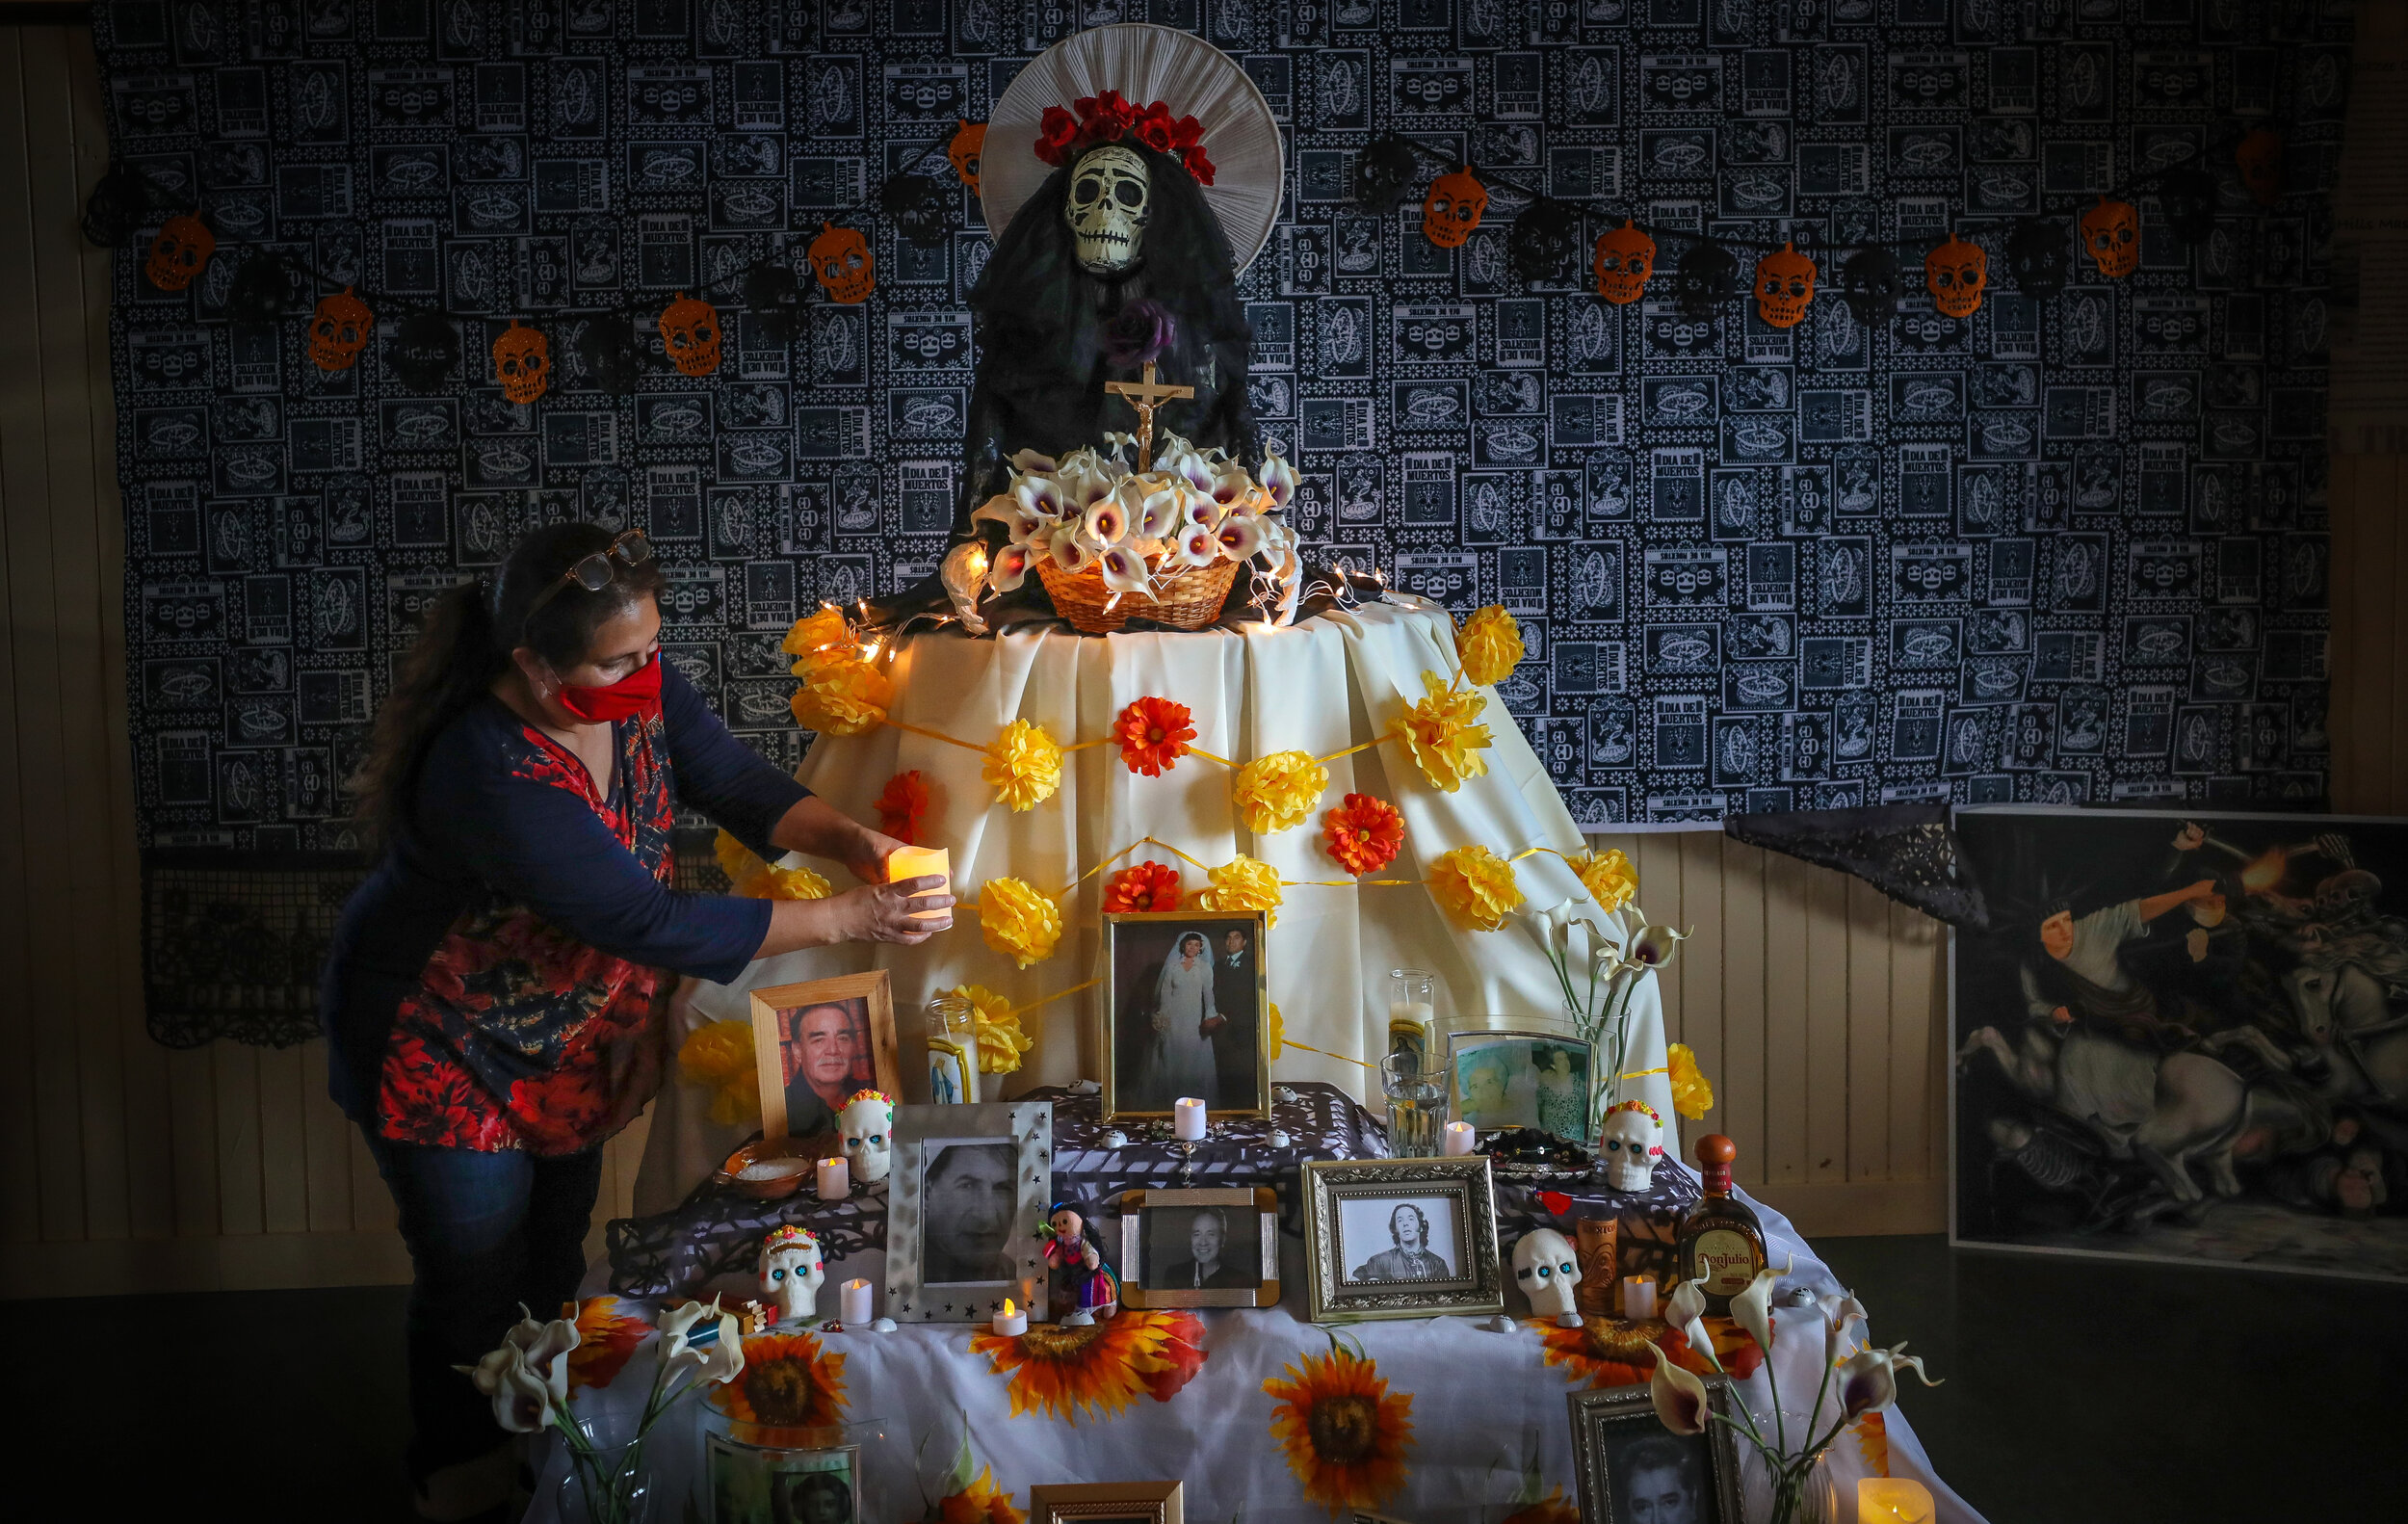  Liz Vigueras finishes the altar at the Highwood Museum in High River, Alberta, for Day of the Dead celebrations. This year the altar is also remembering those who have died from COVID-19. 